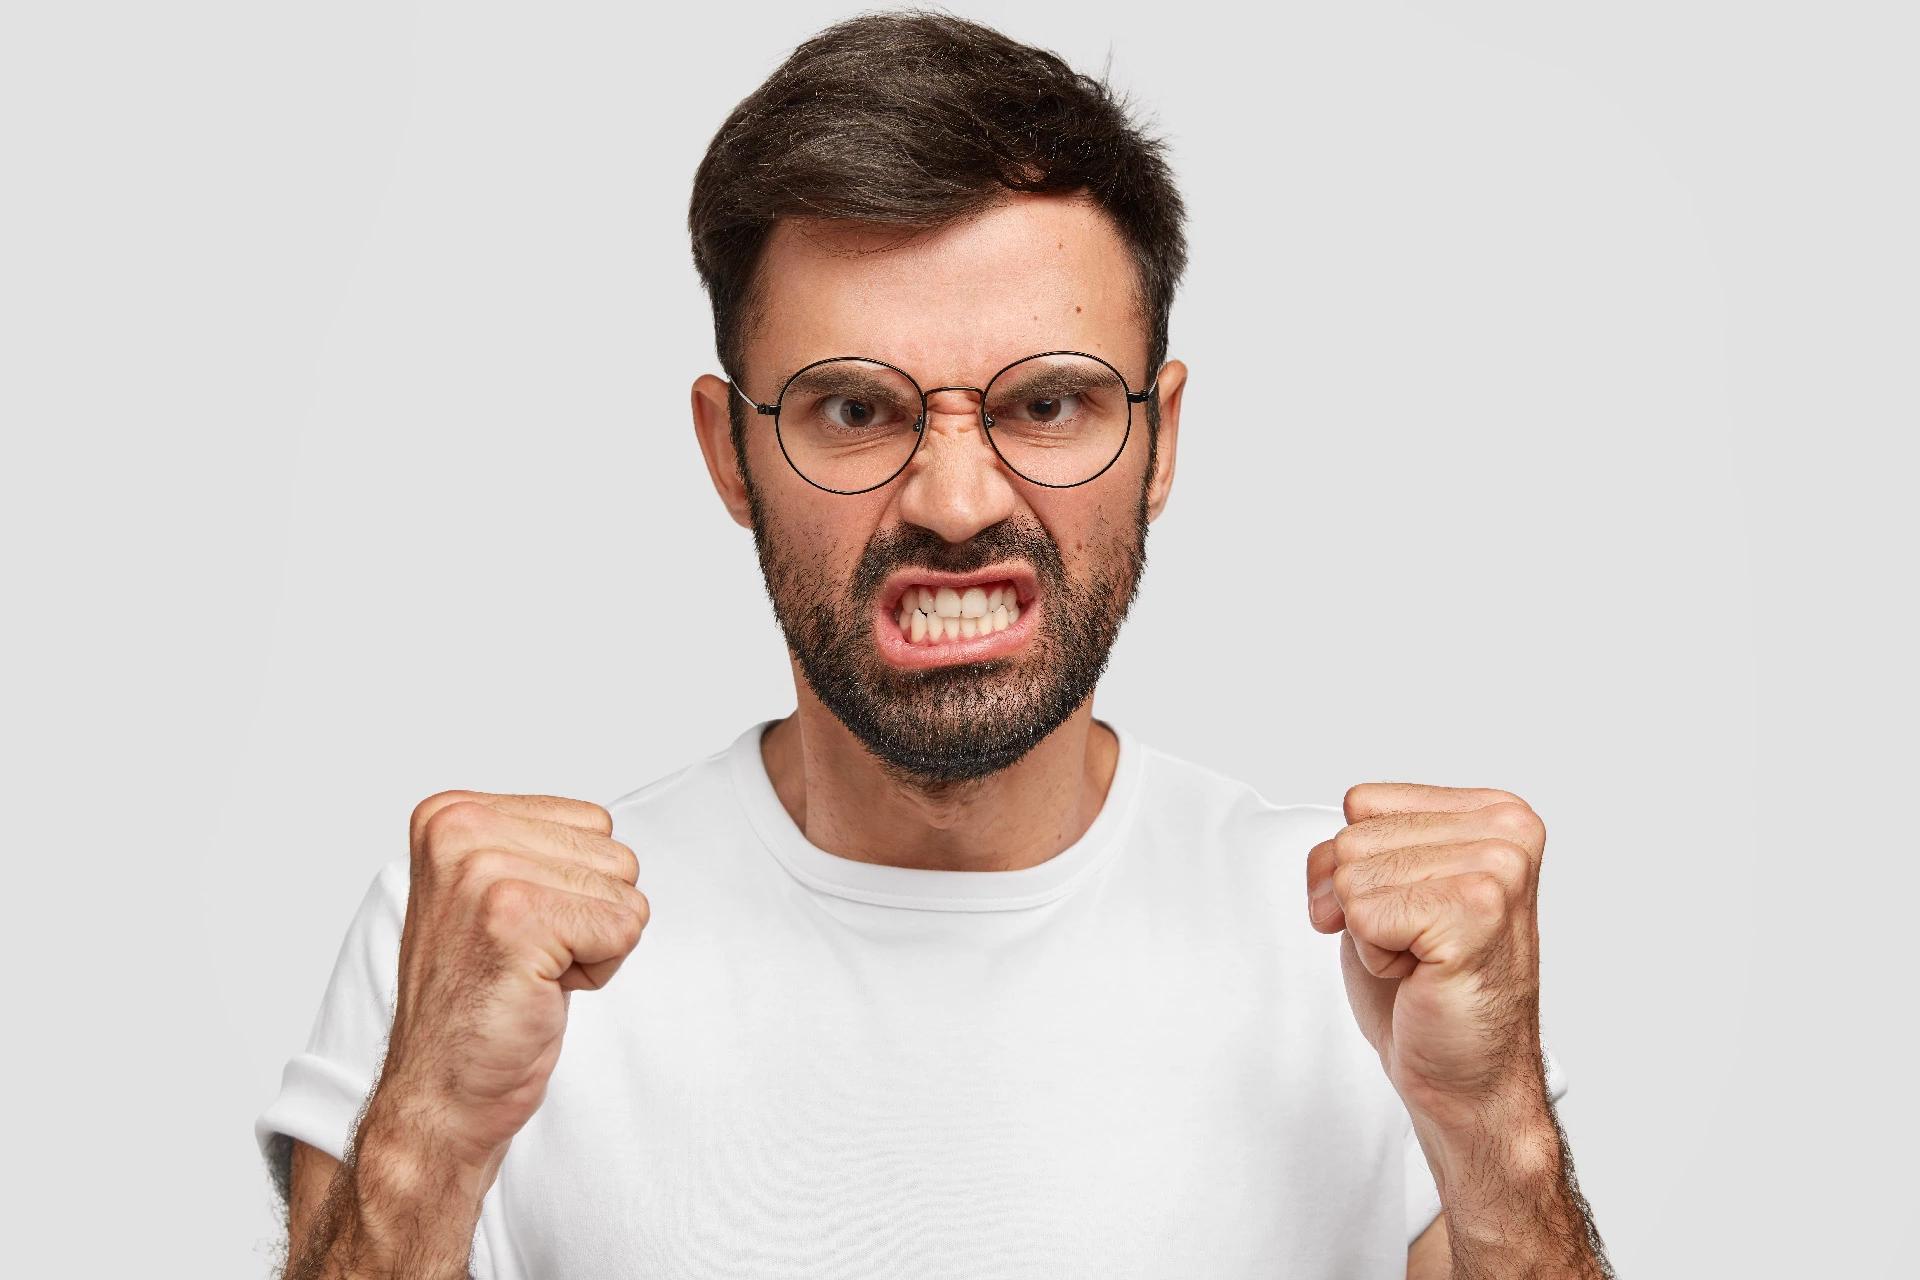 25 Useful Tips on How to Control Anger, Stay Calm and Composed